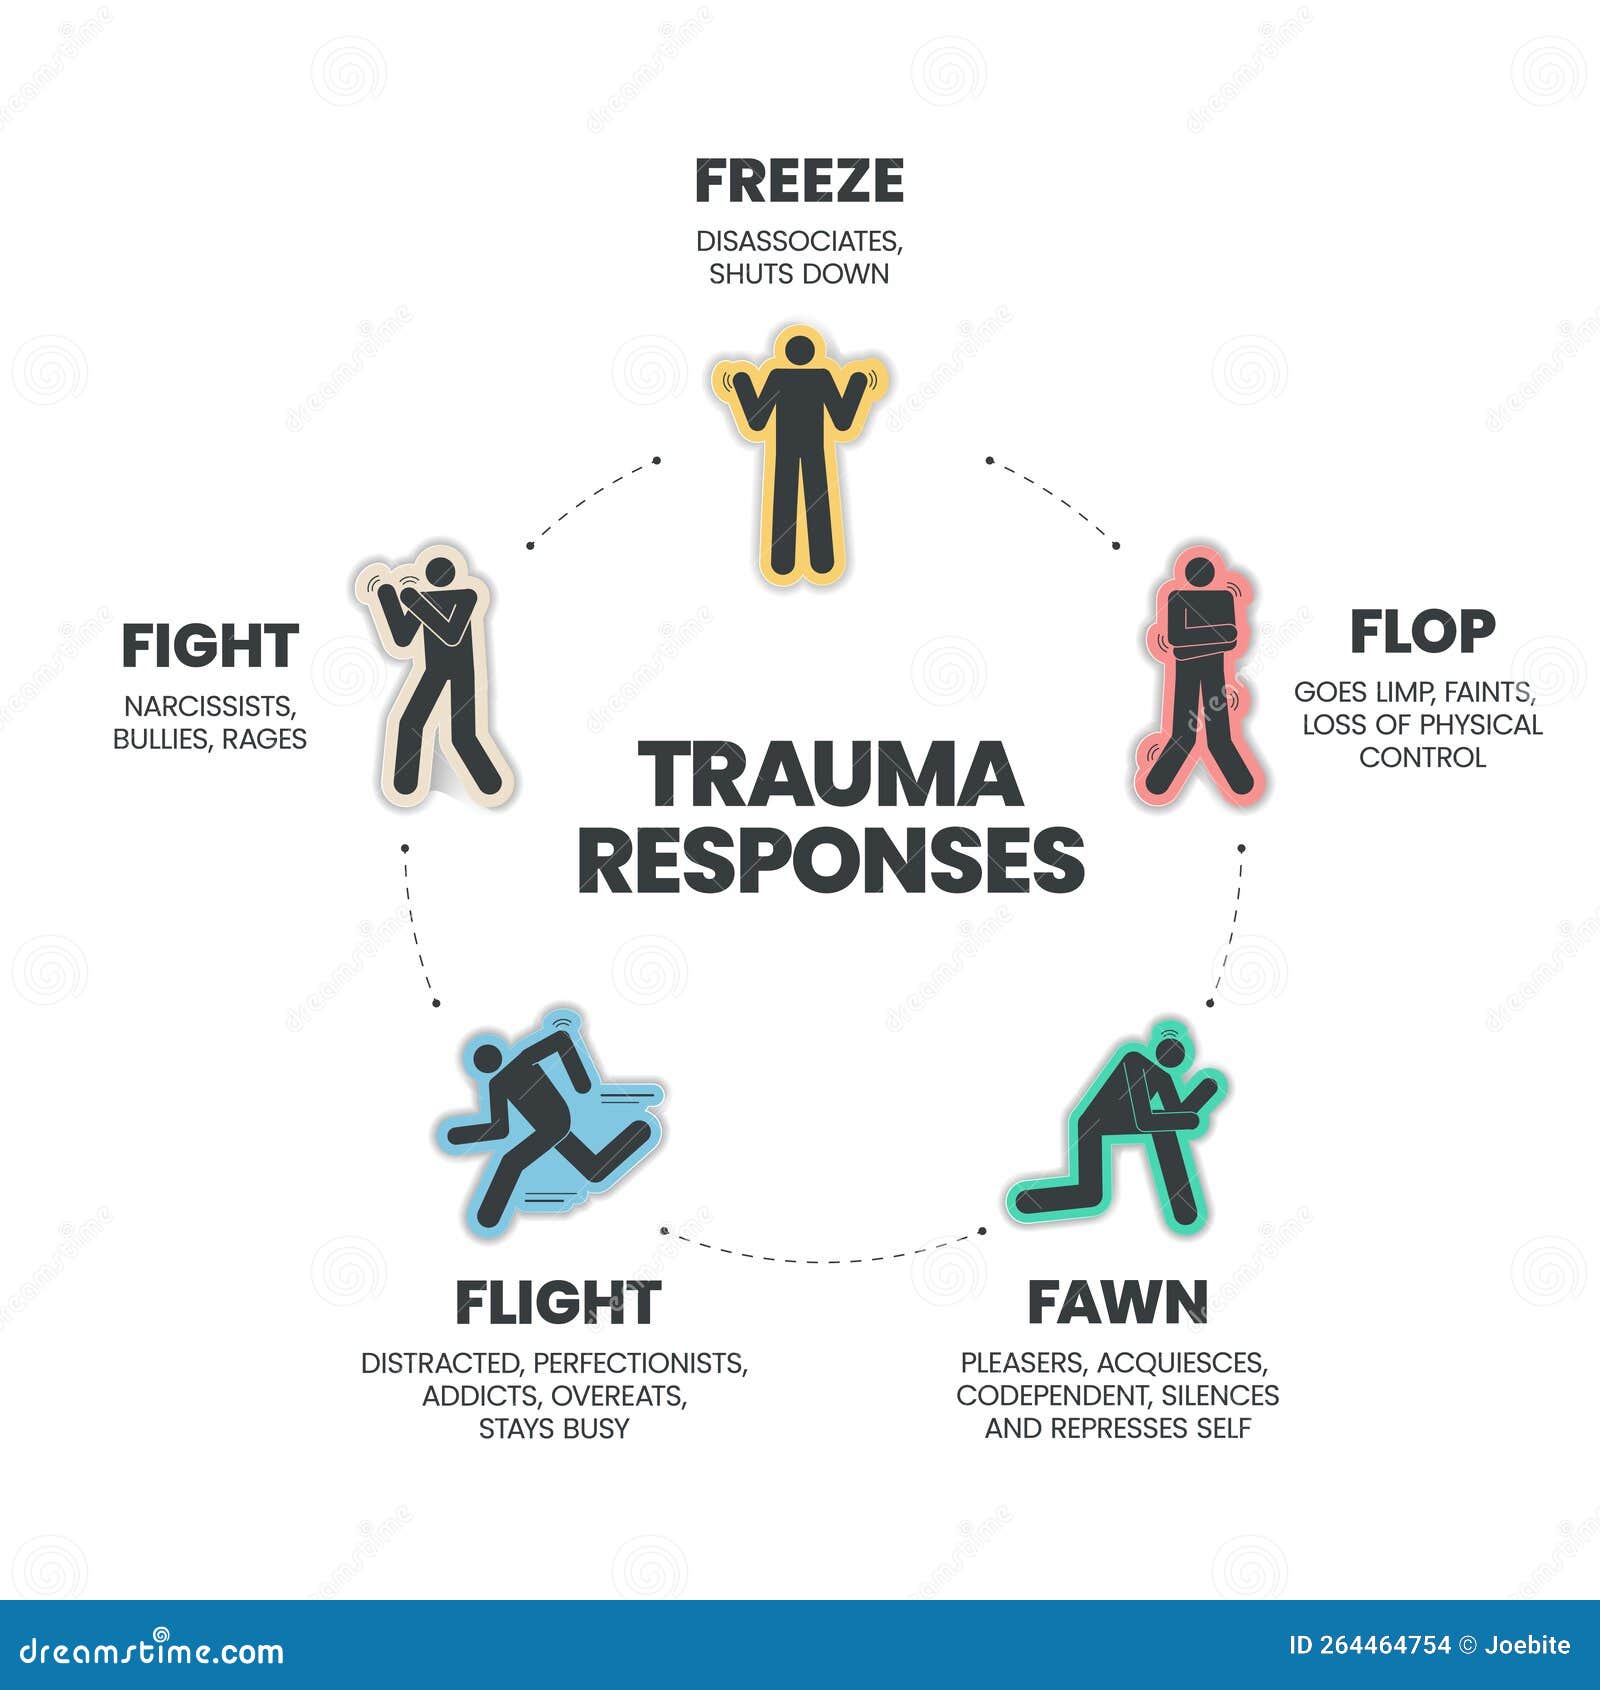 fear responses model infographic presentation template with icons is a 5f trauma response such as fight, fawn, flight, flop and